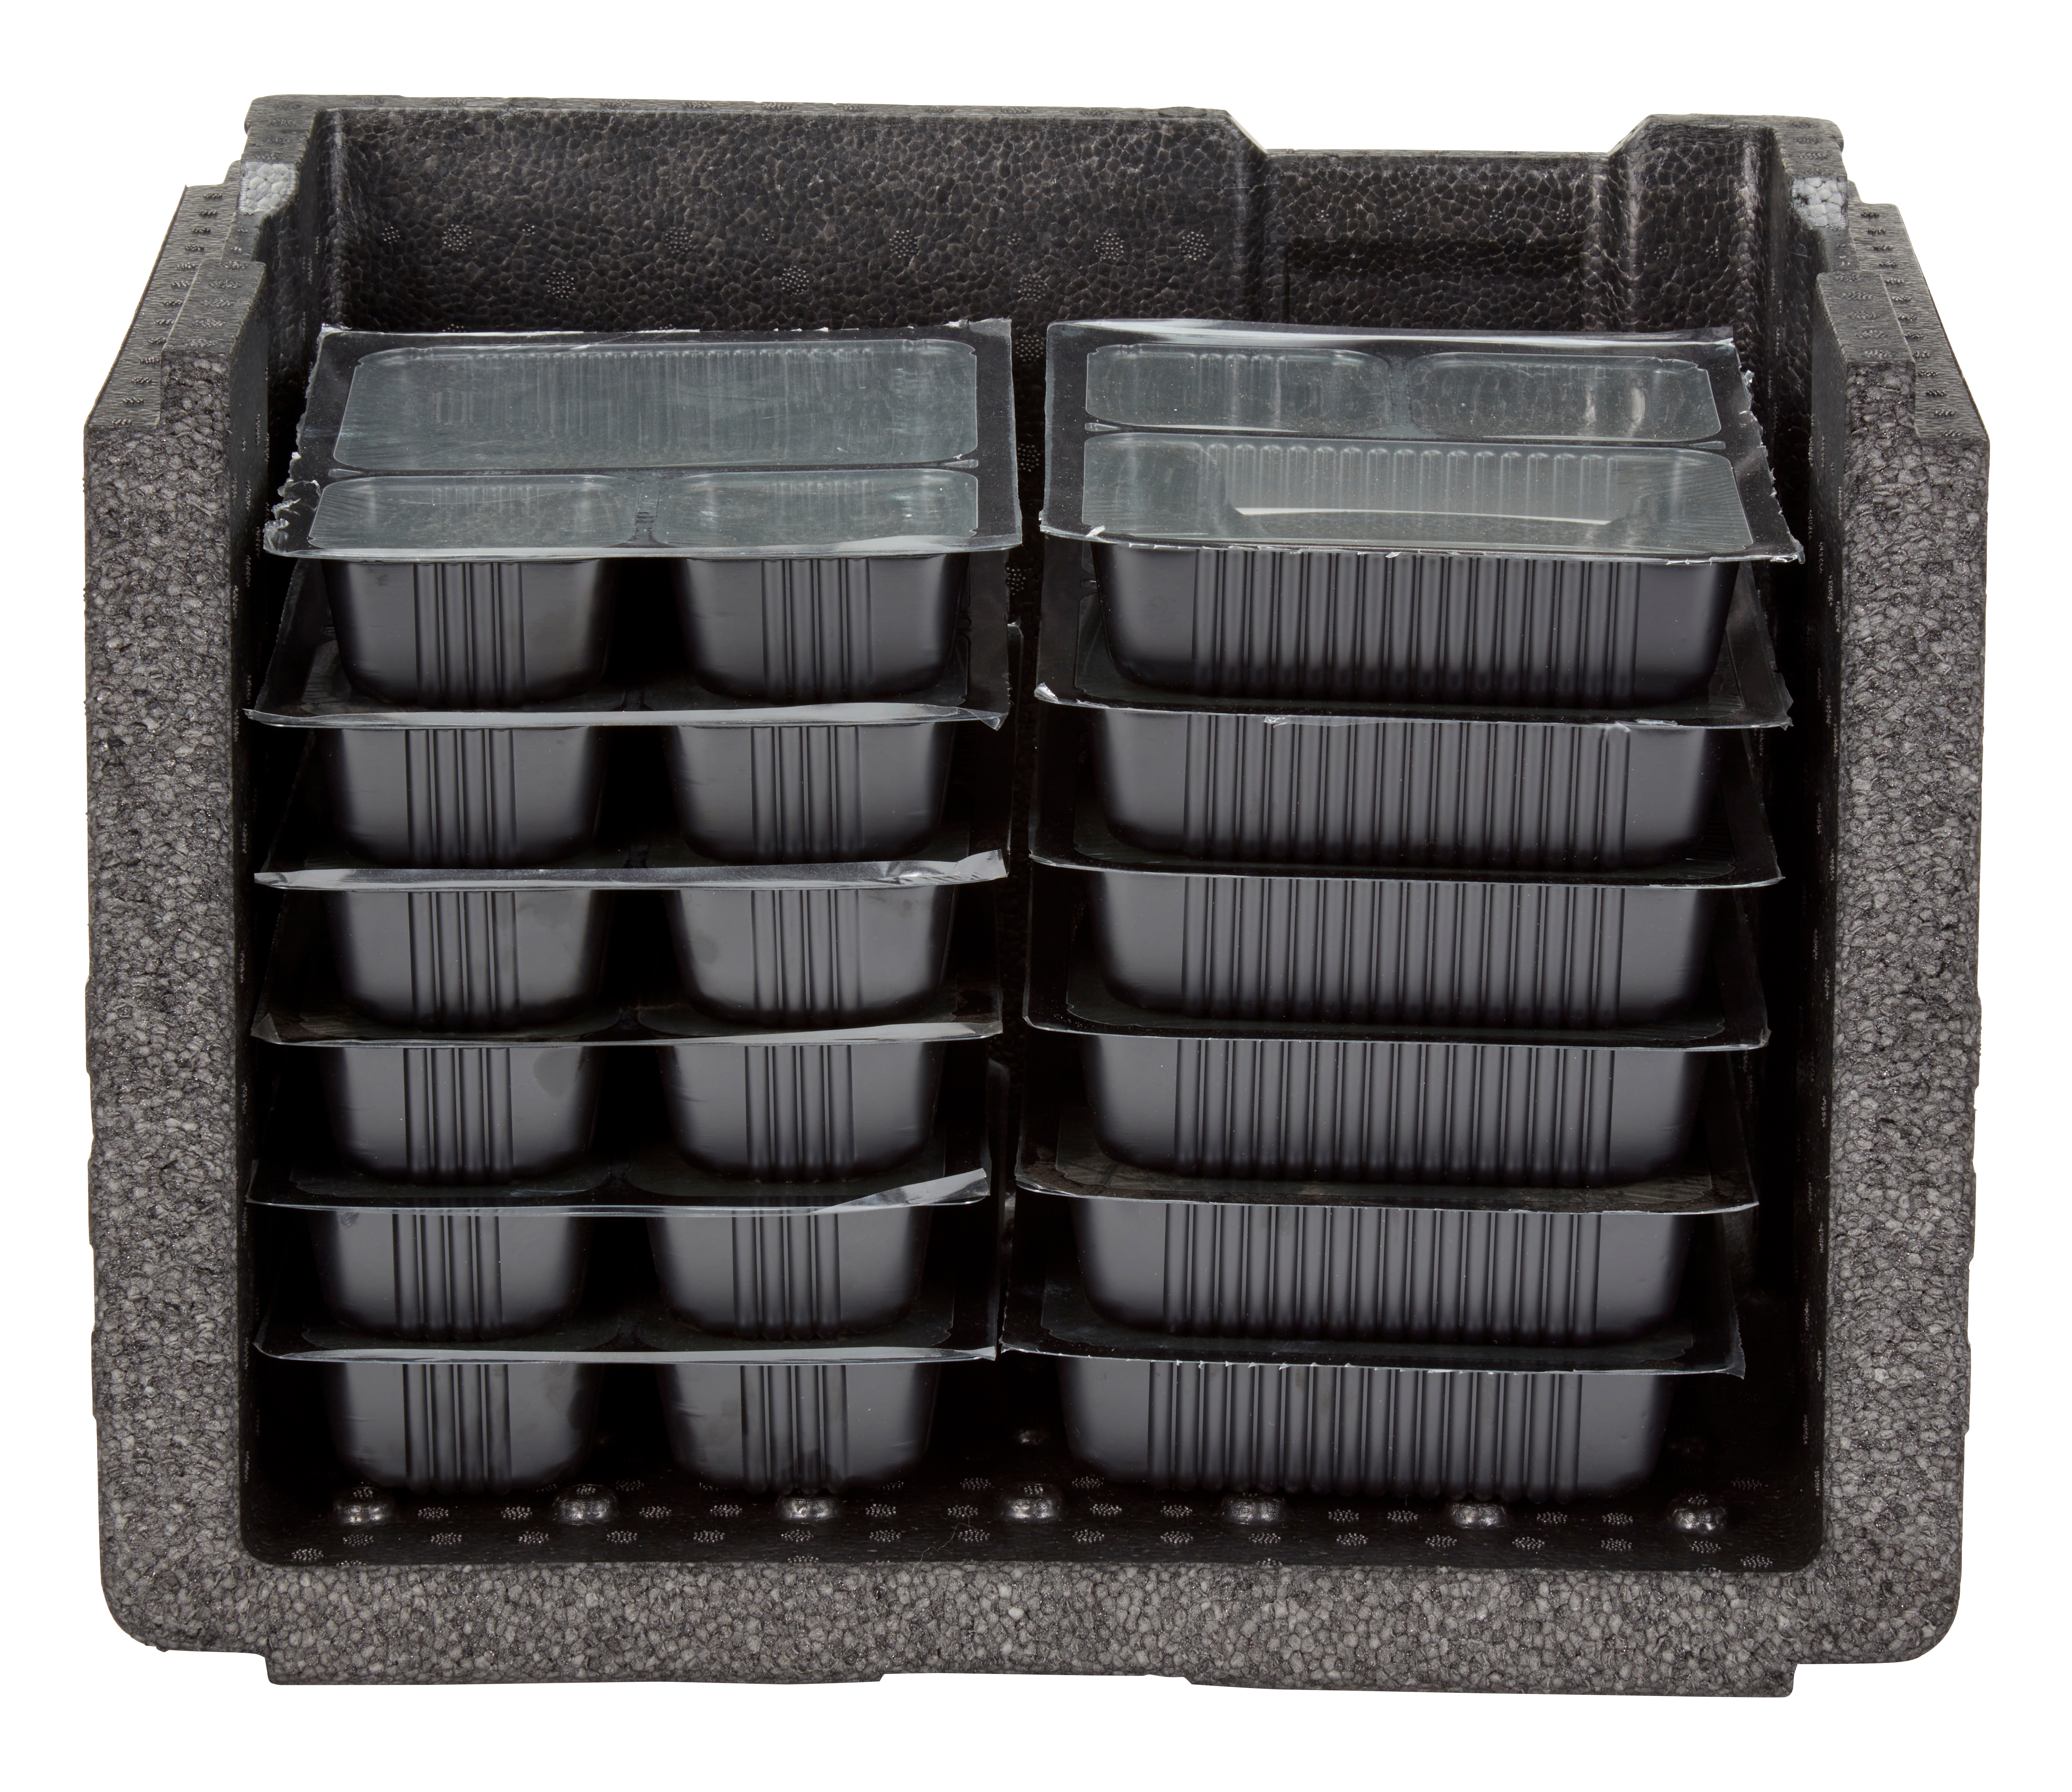 EPPMTSW110 Cam GoBox for Meal Delivery Trays Black 24 trays